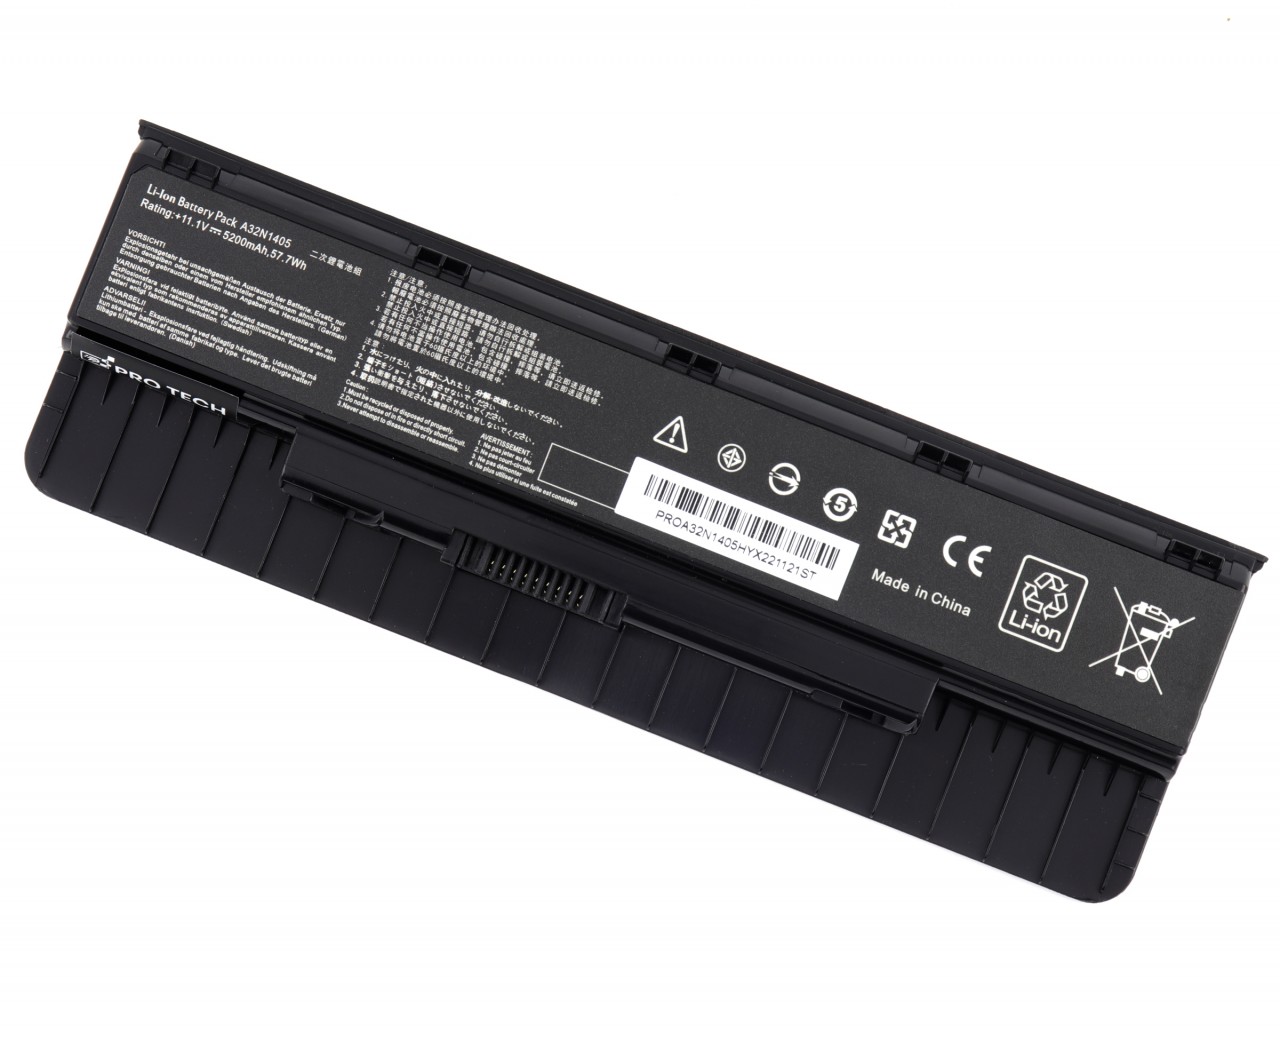 Baterie Asus N551JW 57.7Wh / 5200mAh Protech High Quality Replacement